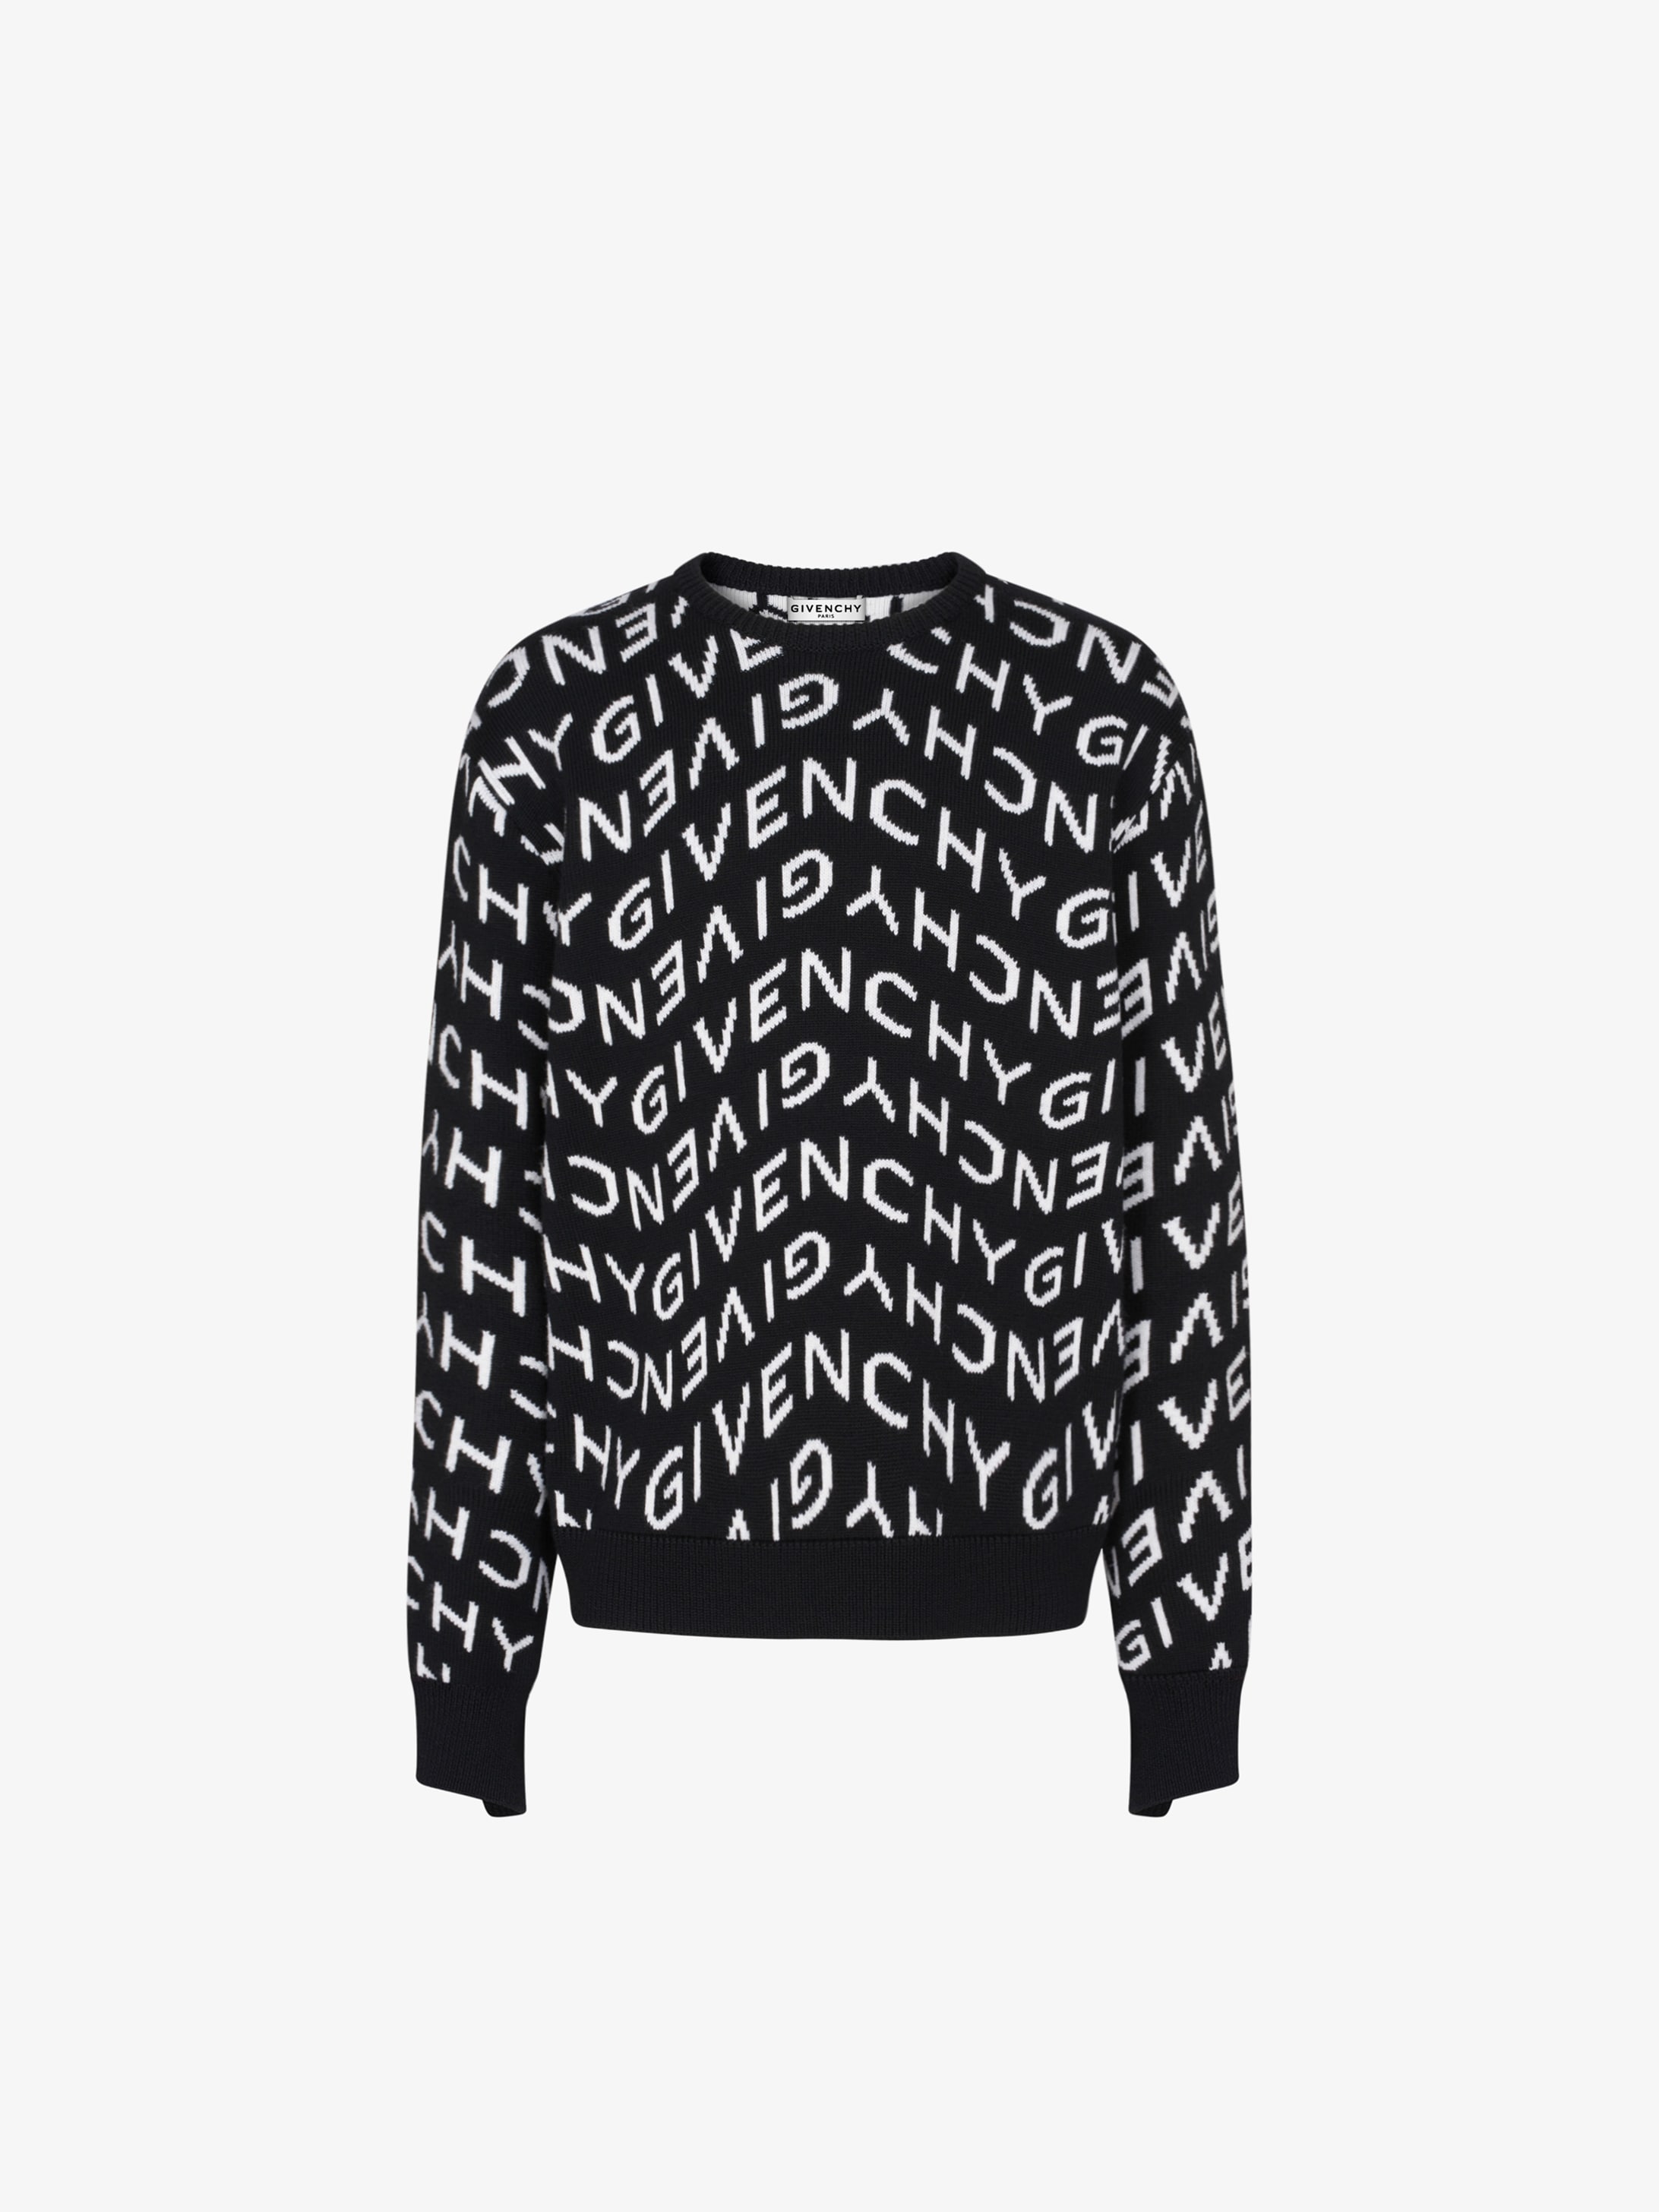 GIVENCHY Refracted sweater in jacquard | GIVENCHY Paris